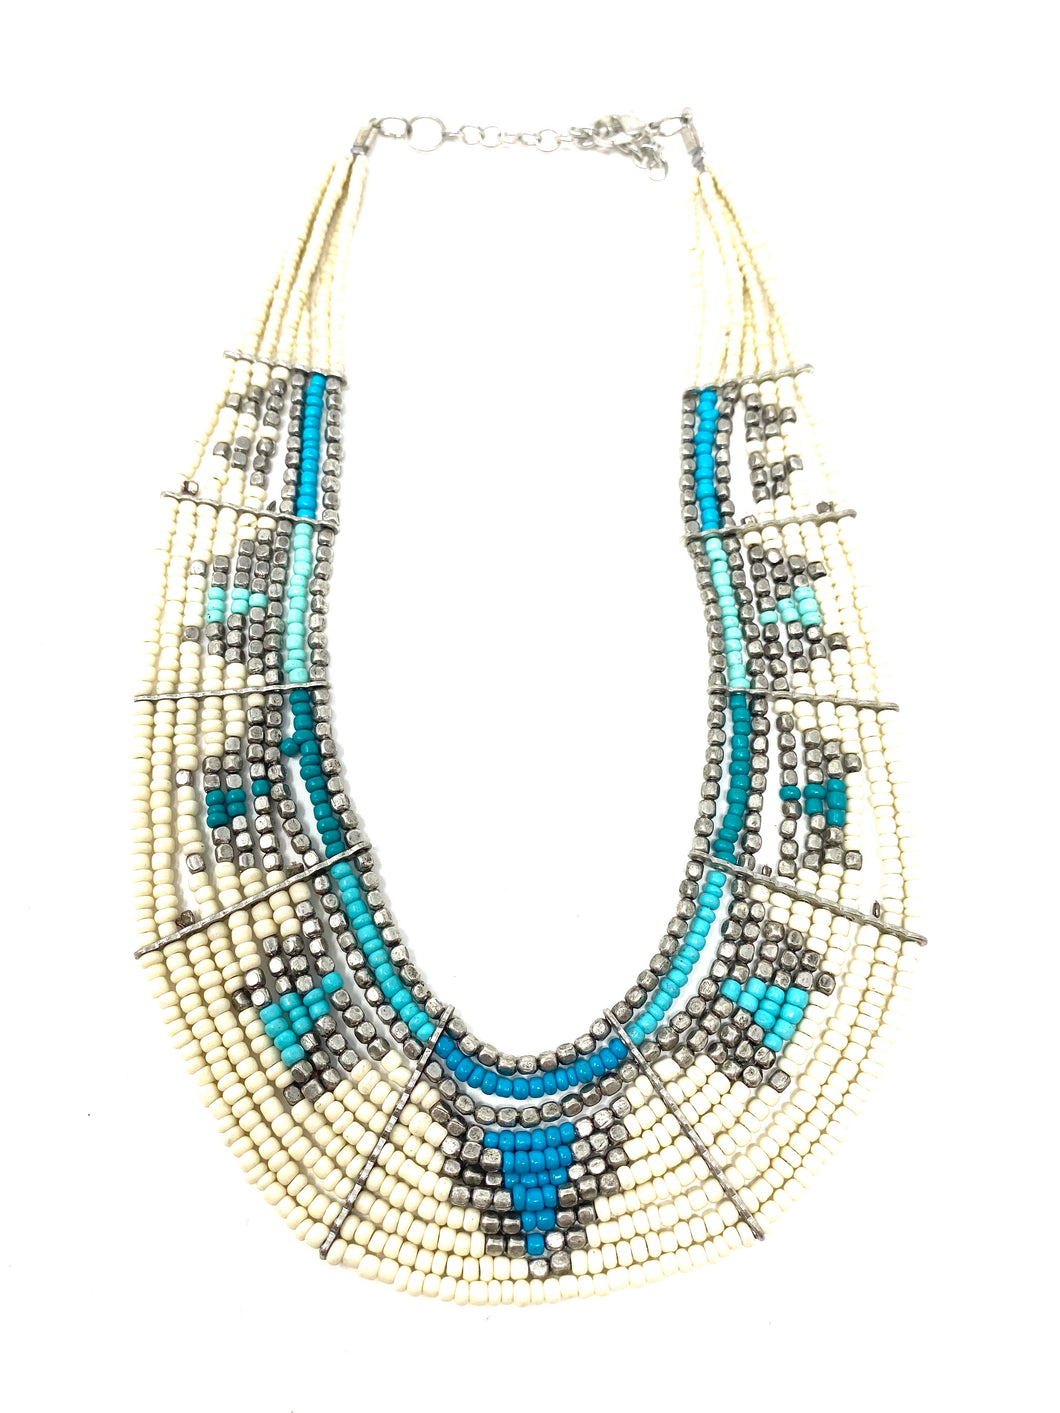 Thick Collar Tribal Necklace